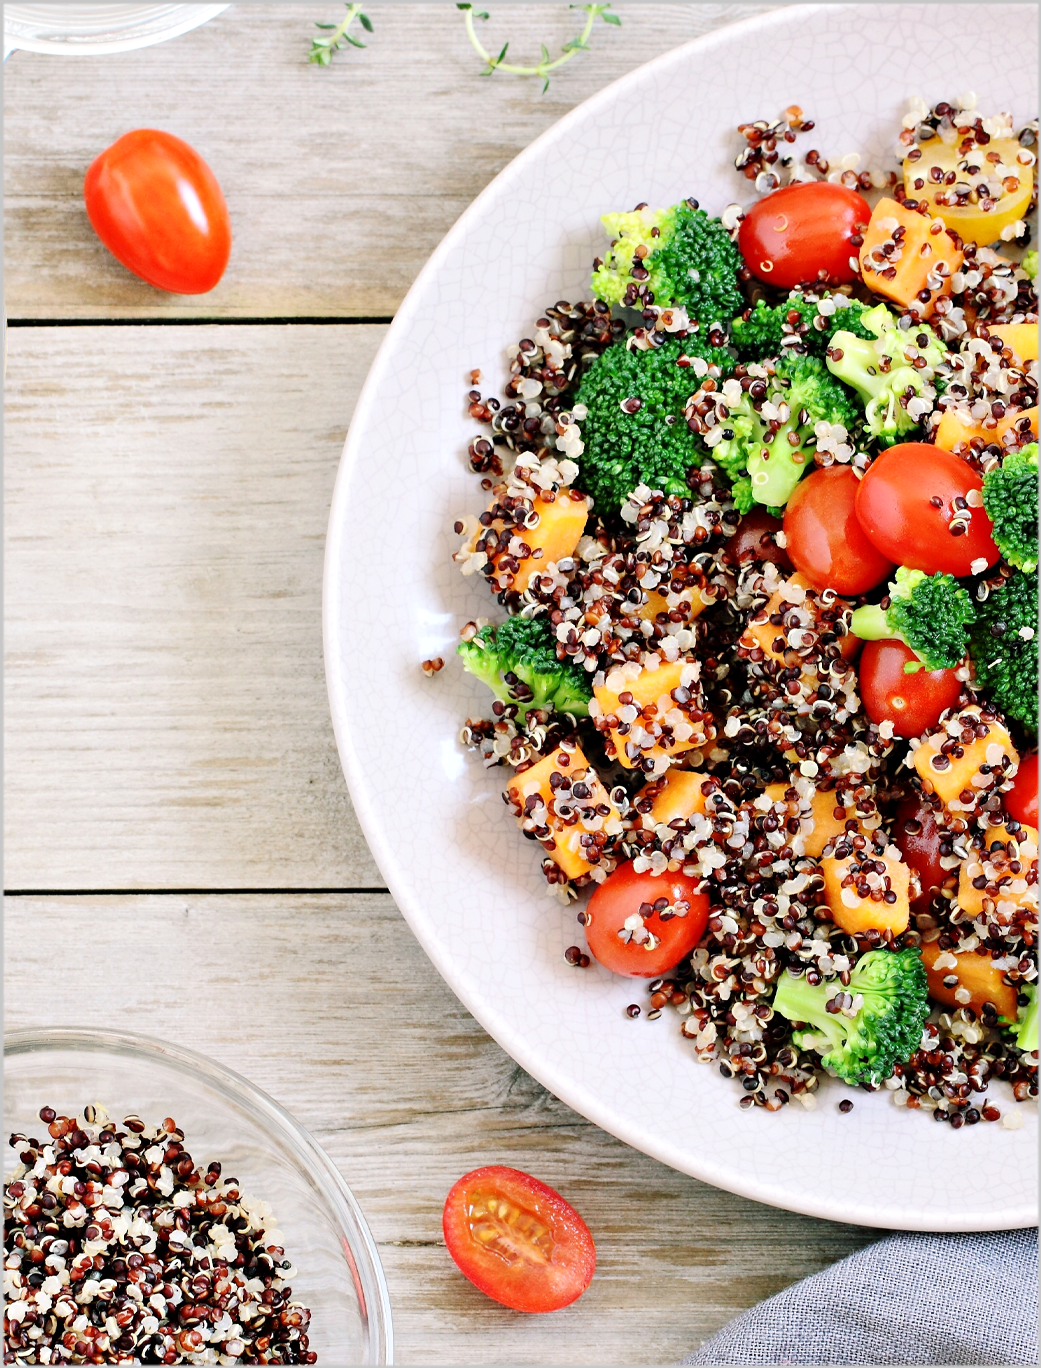 QUINOA. THE NUMBER ONE SUPERFOOD, A REAL POWERHOUSE.